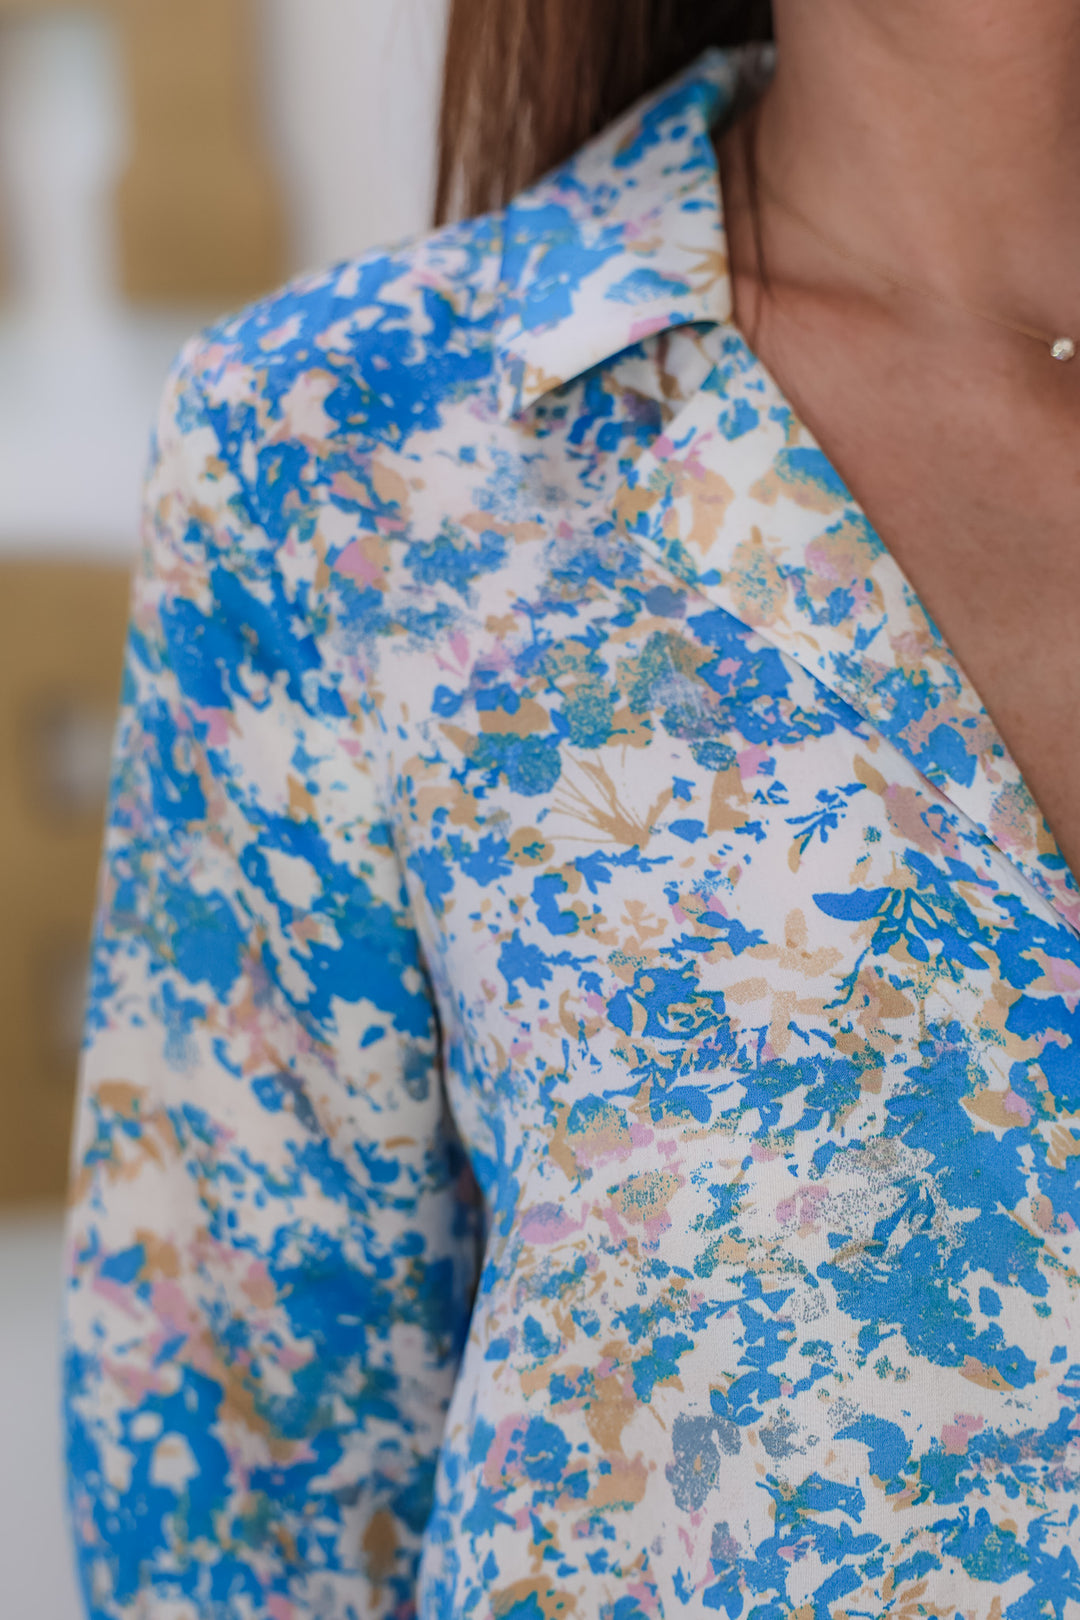 A closeup of the shoulder of a woman wearing a satin top with blue, pink, white, yellow and cream in it.